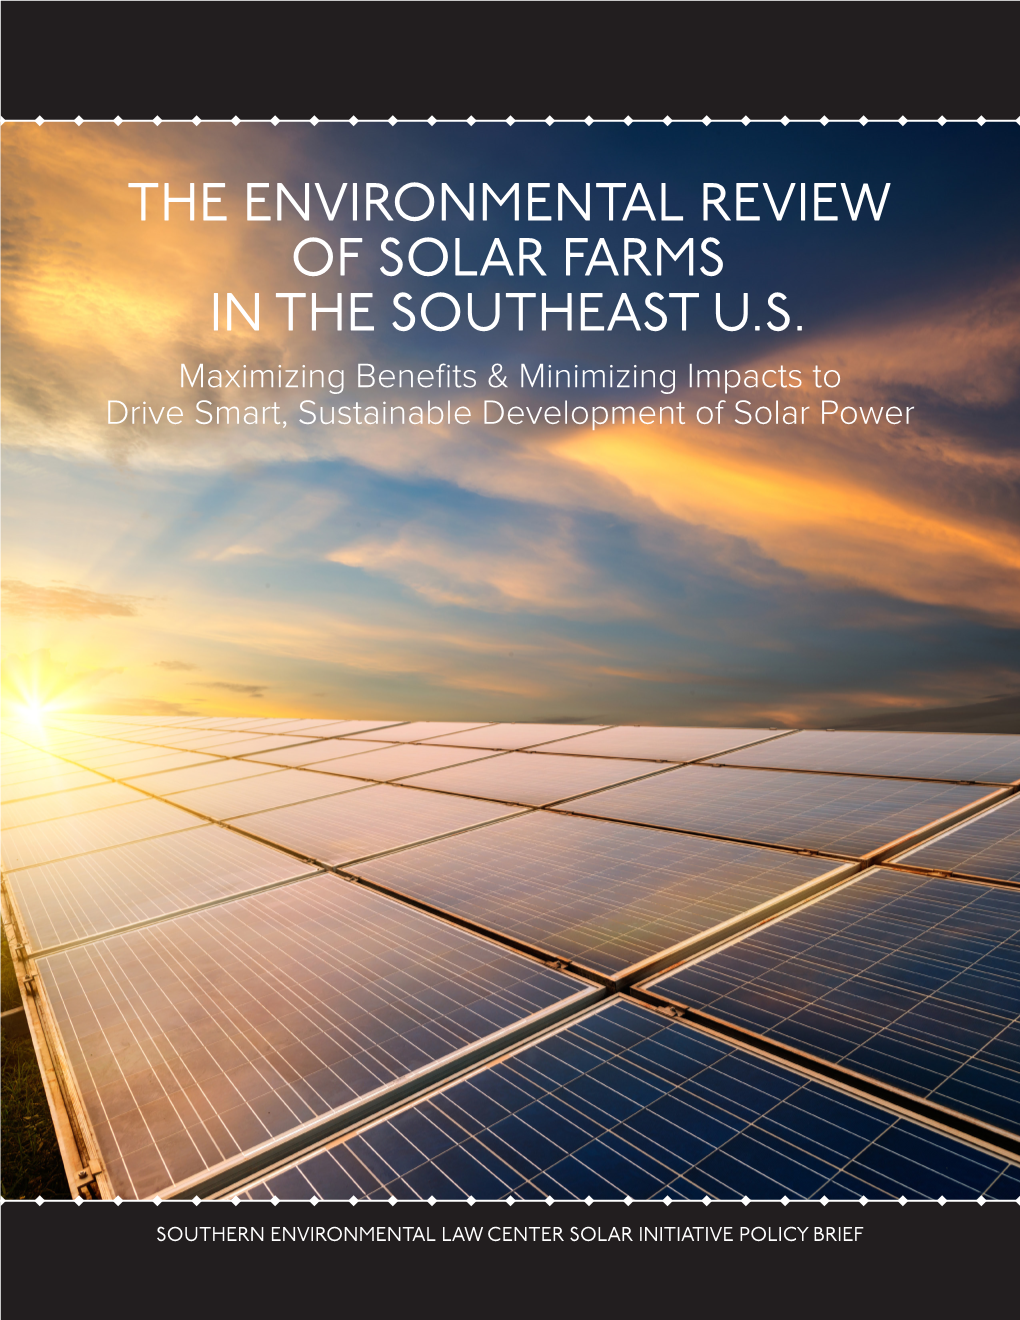 The Environmental Review of Solar Farms in the Southeast U.S